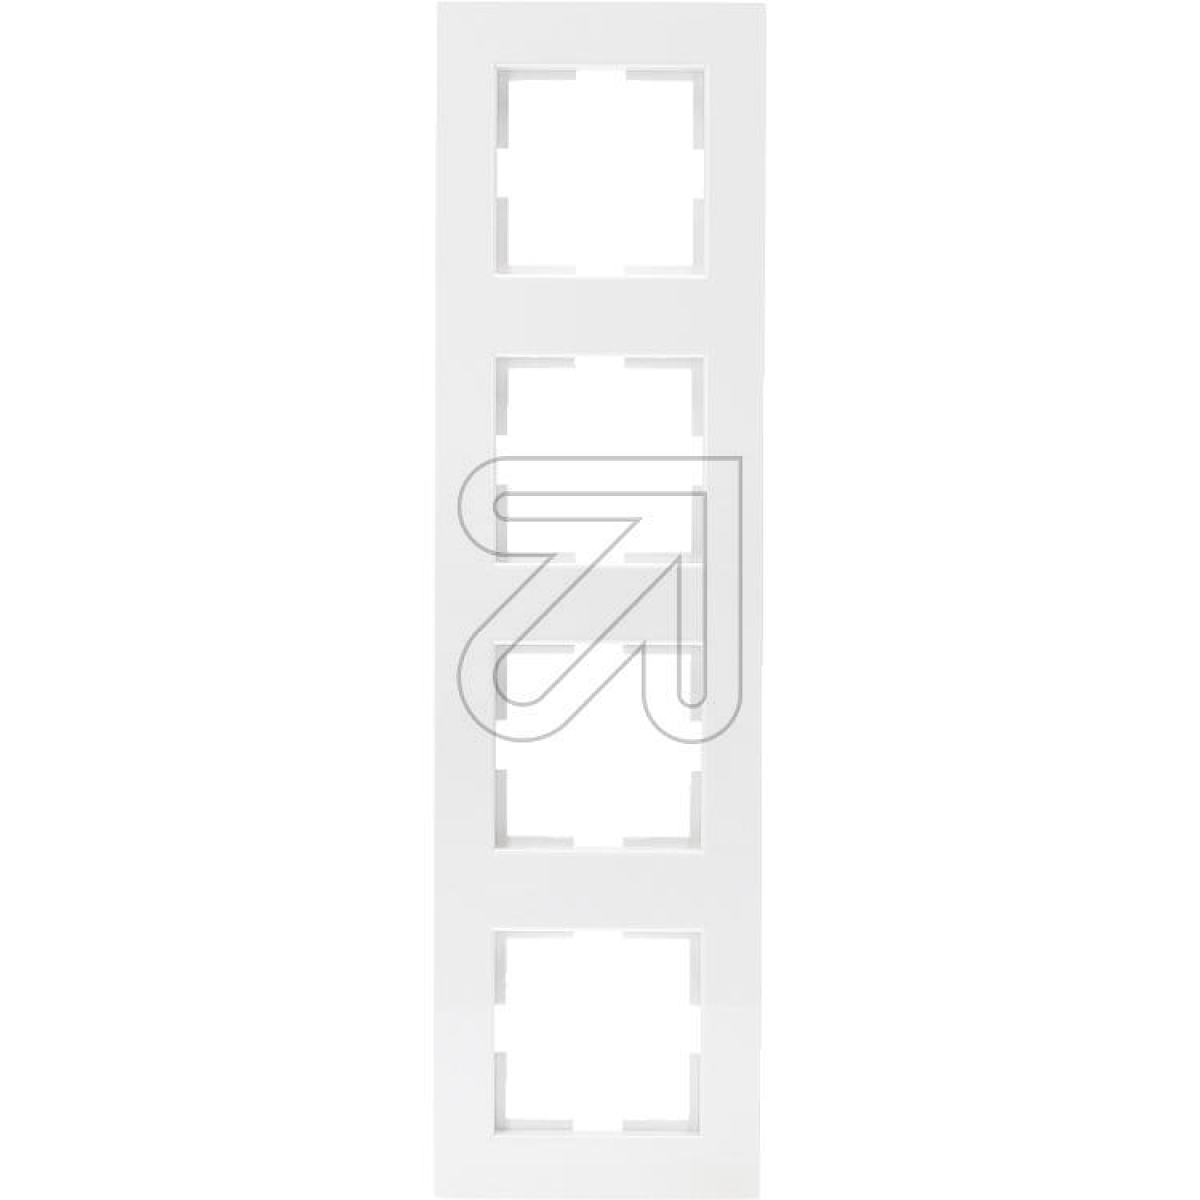 EGBCarriage cover frame 4-fold white 90960263/92501903Article-No: 079185